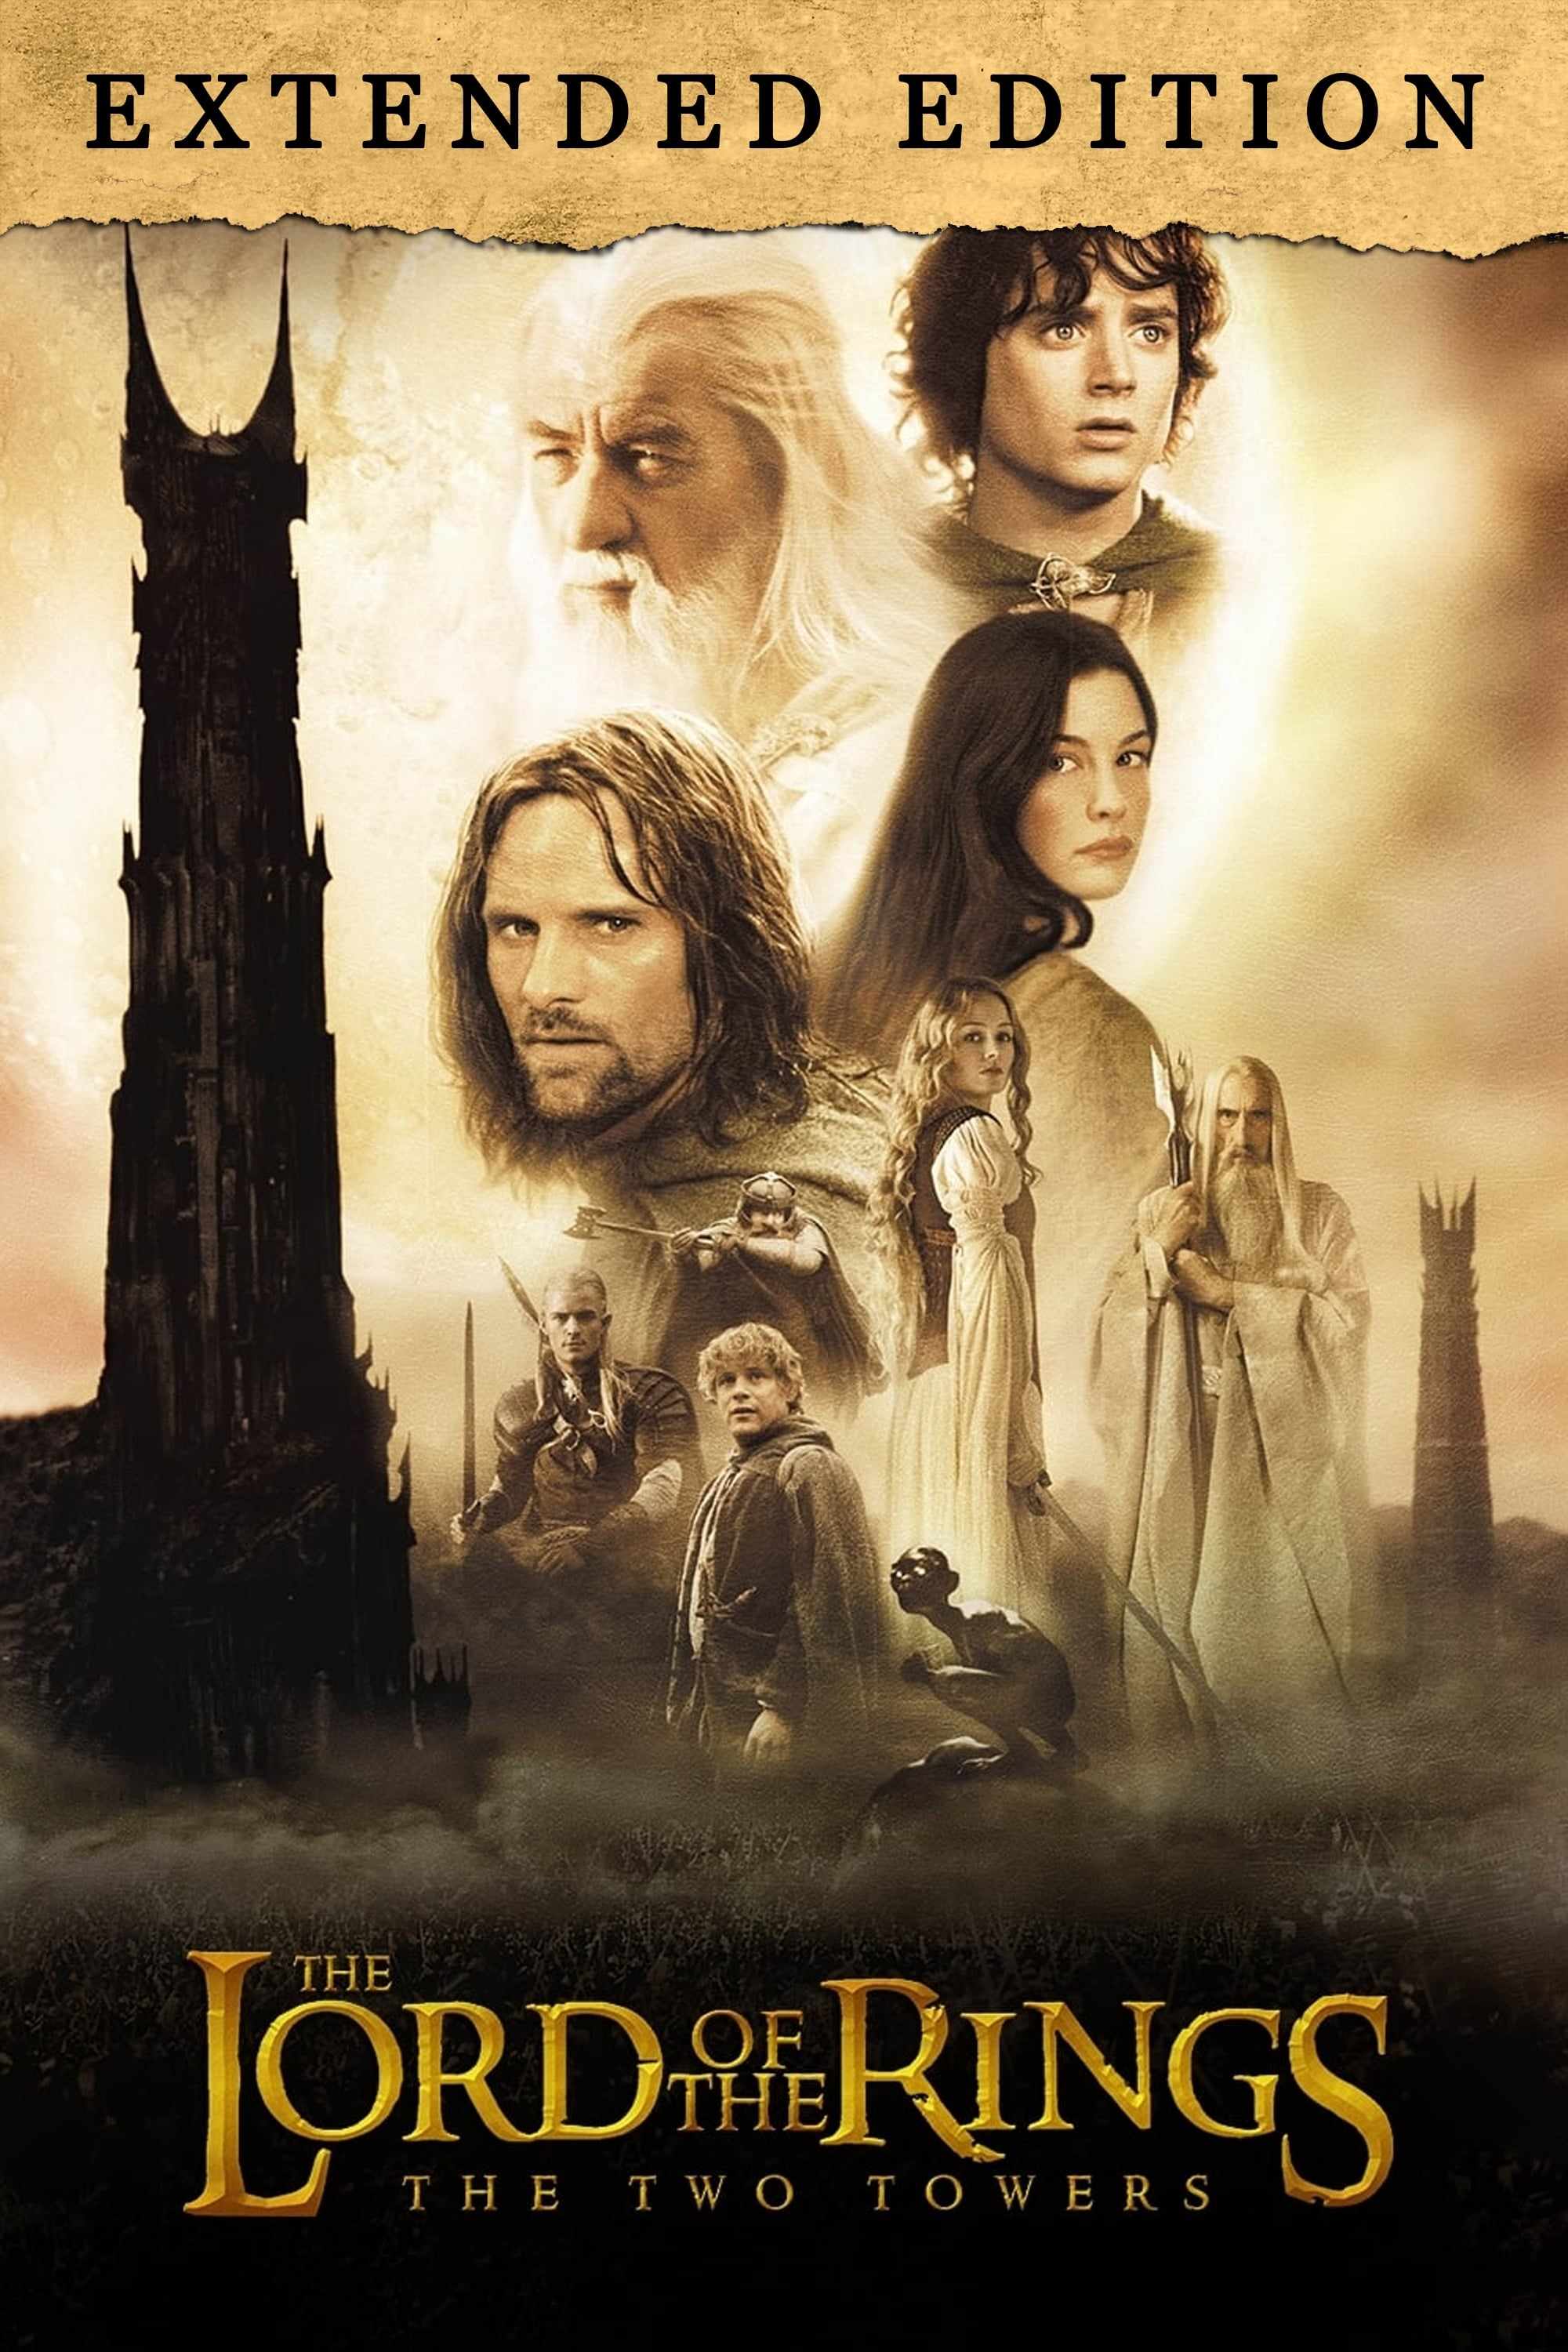 LOTR - The Two Towers